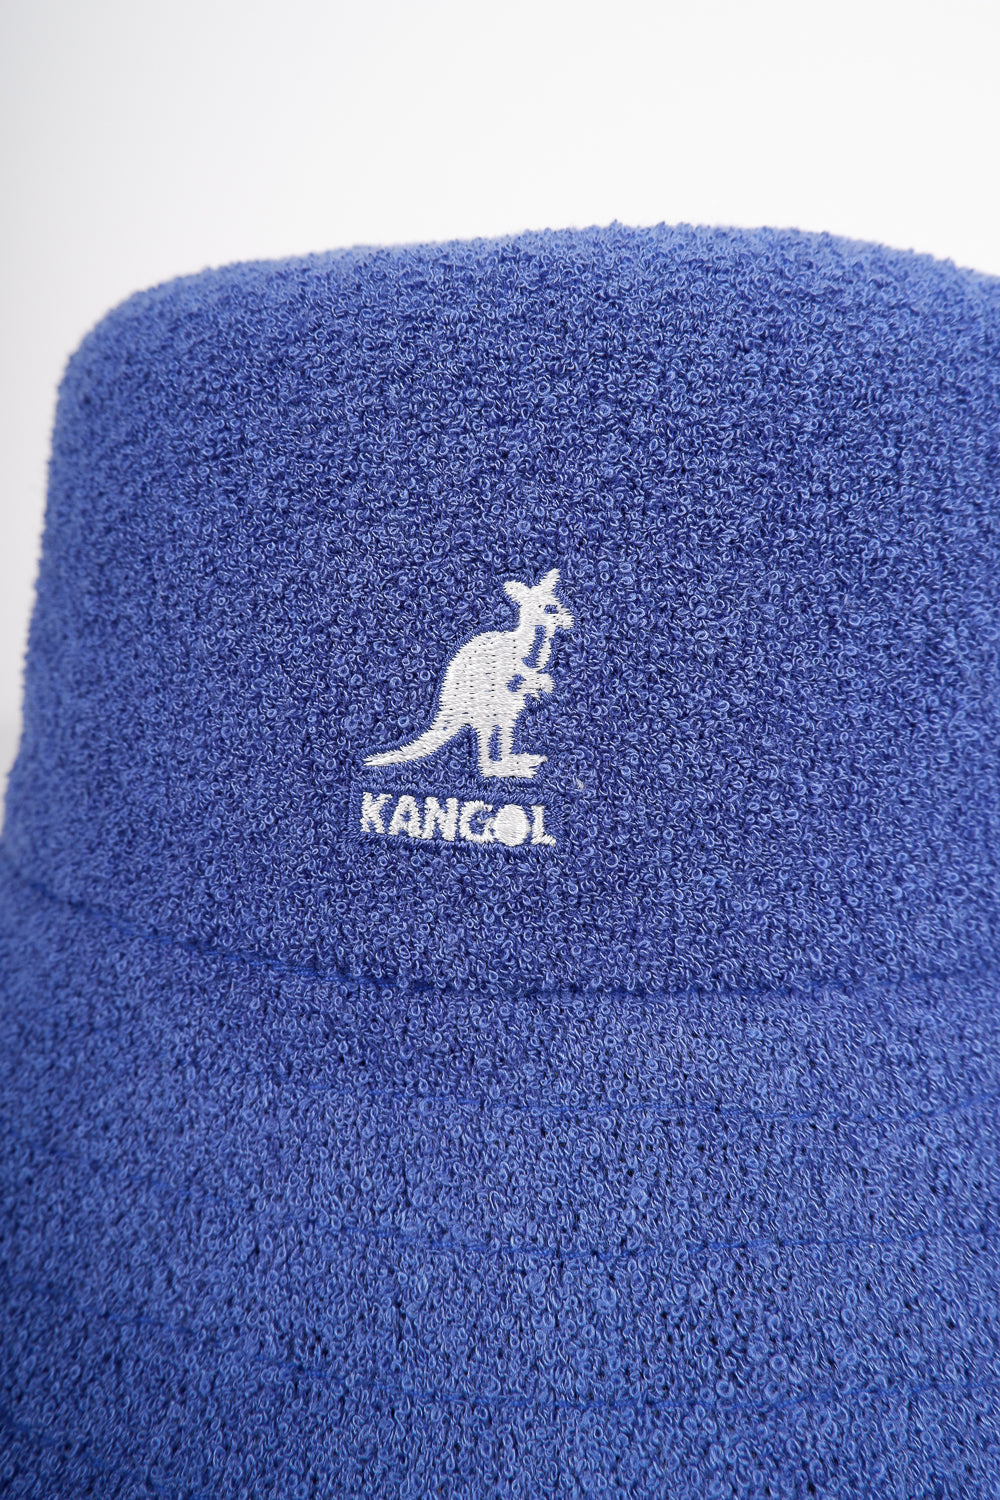 Buy the Kangol Bermuda Bucket Hat Starry Blue at Intro. Spend £50 for free UK delivery. Official stockists. We ship worldwide.